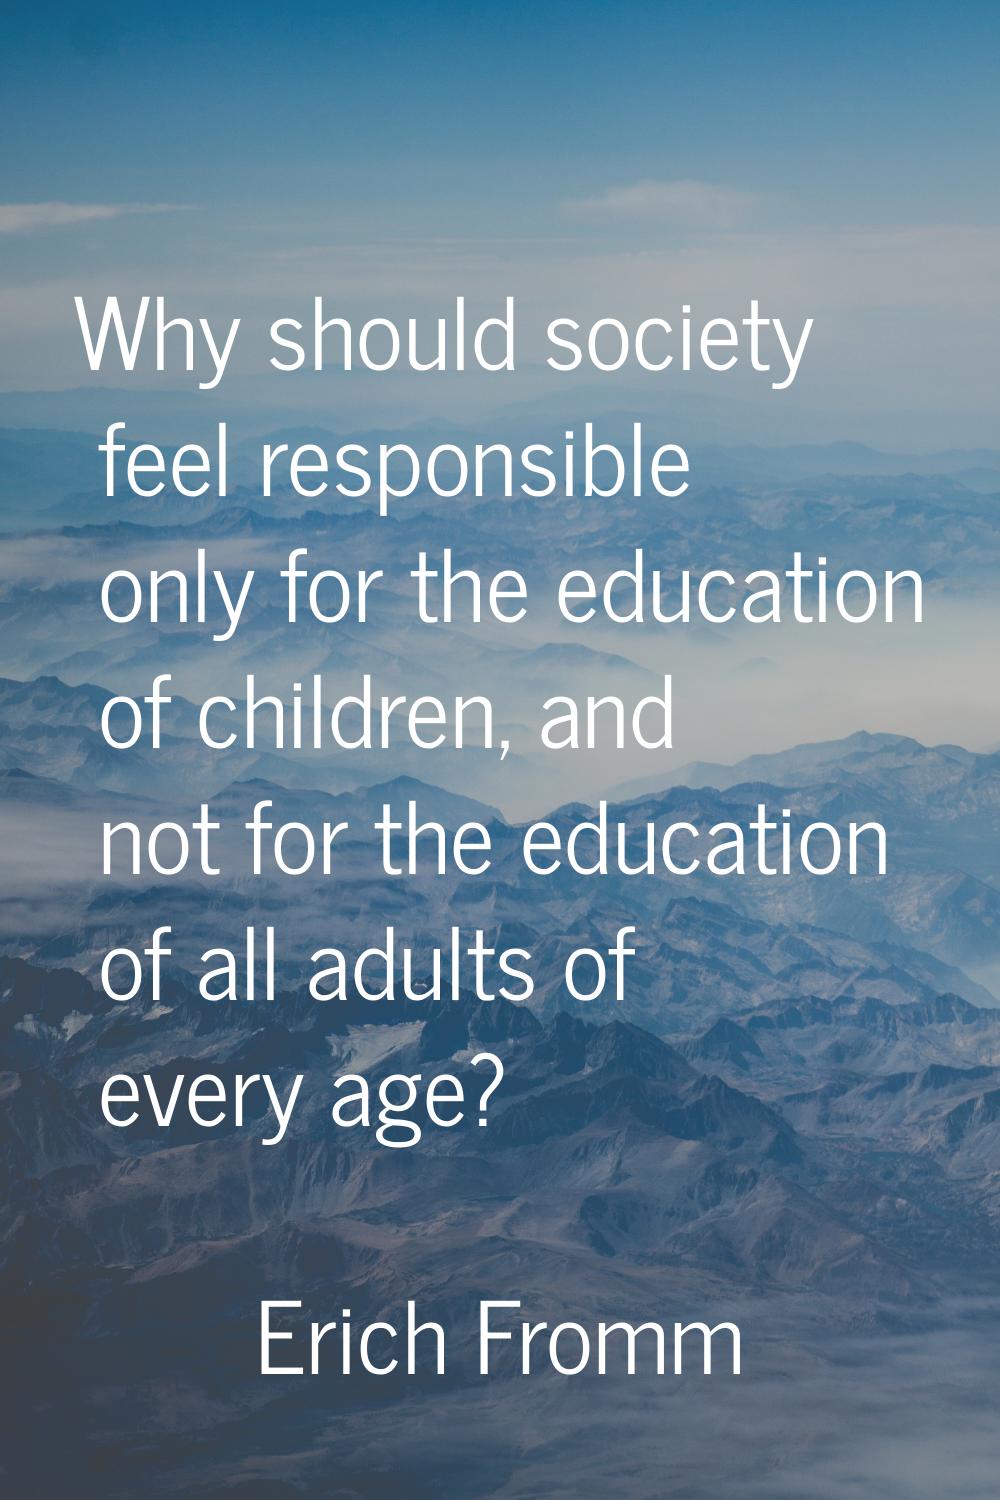 Why should society feel responsible only for the education of children, and not for the education o